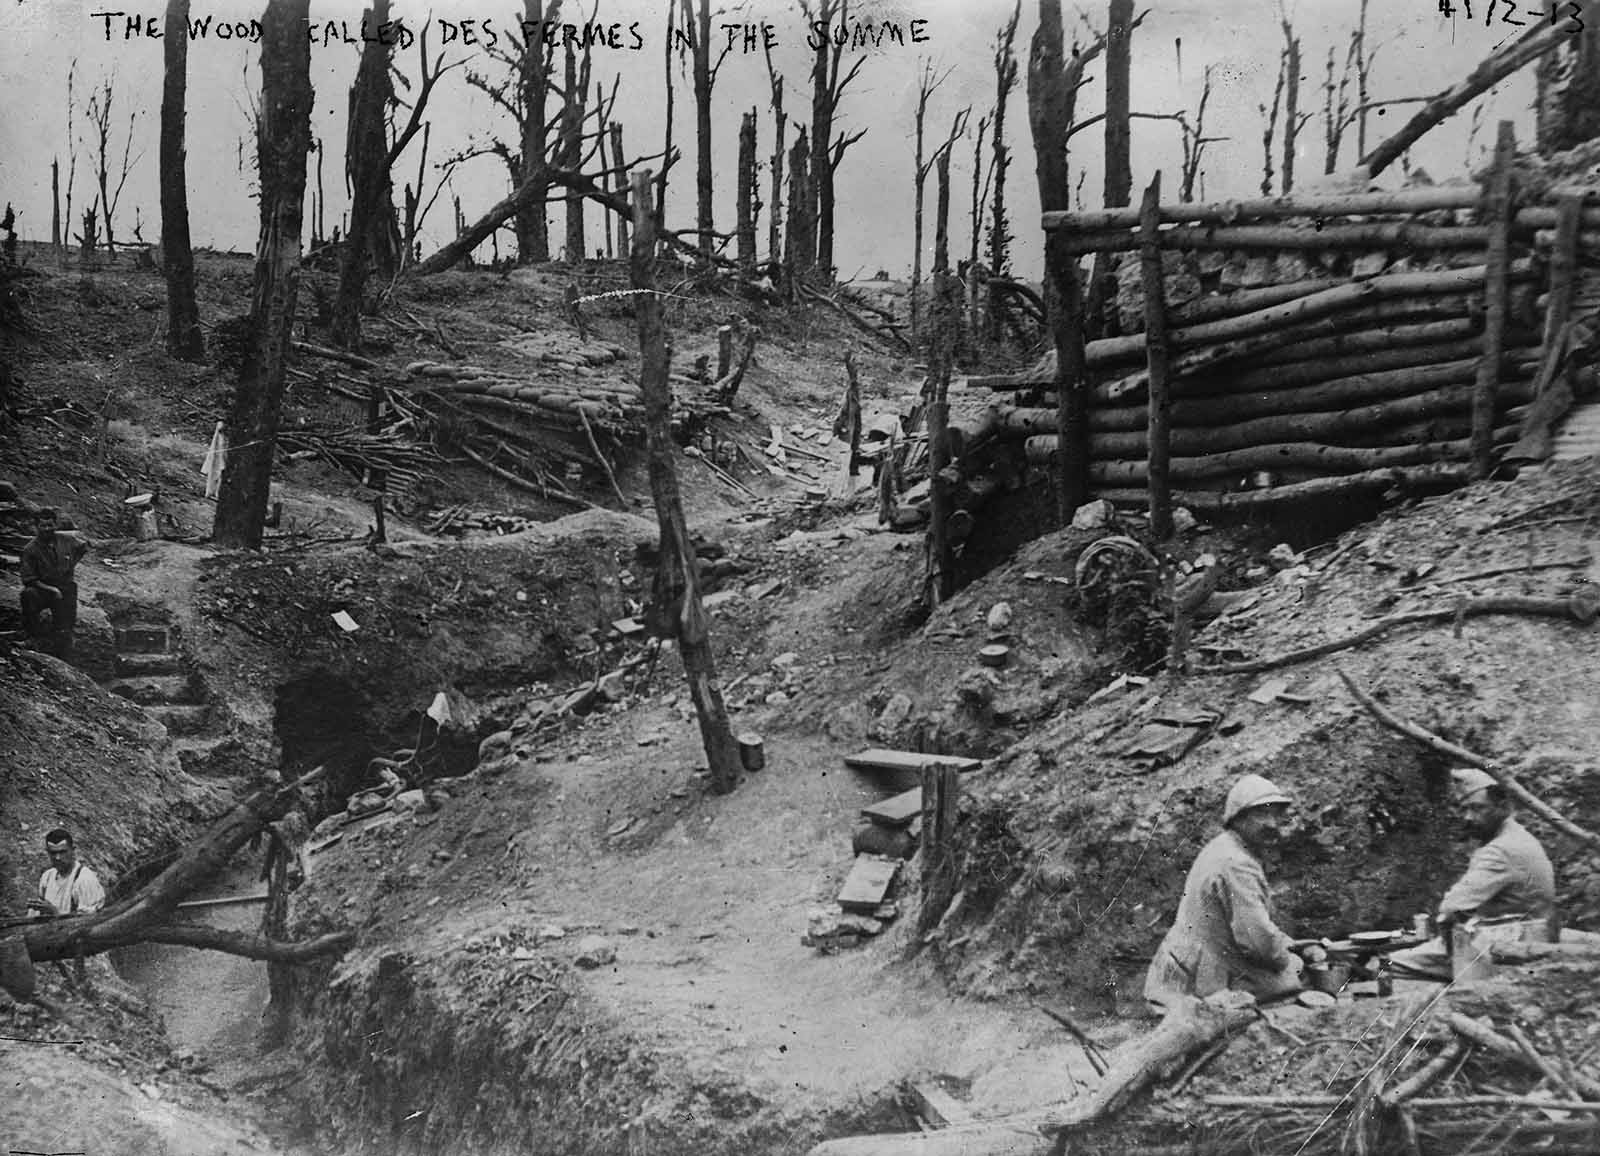 Soldiers sit in the trenches of the wood called Des Fermes in the Somme.